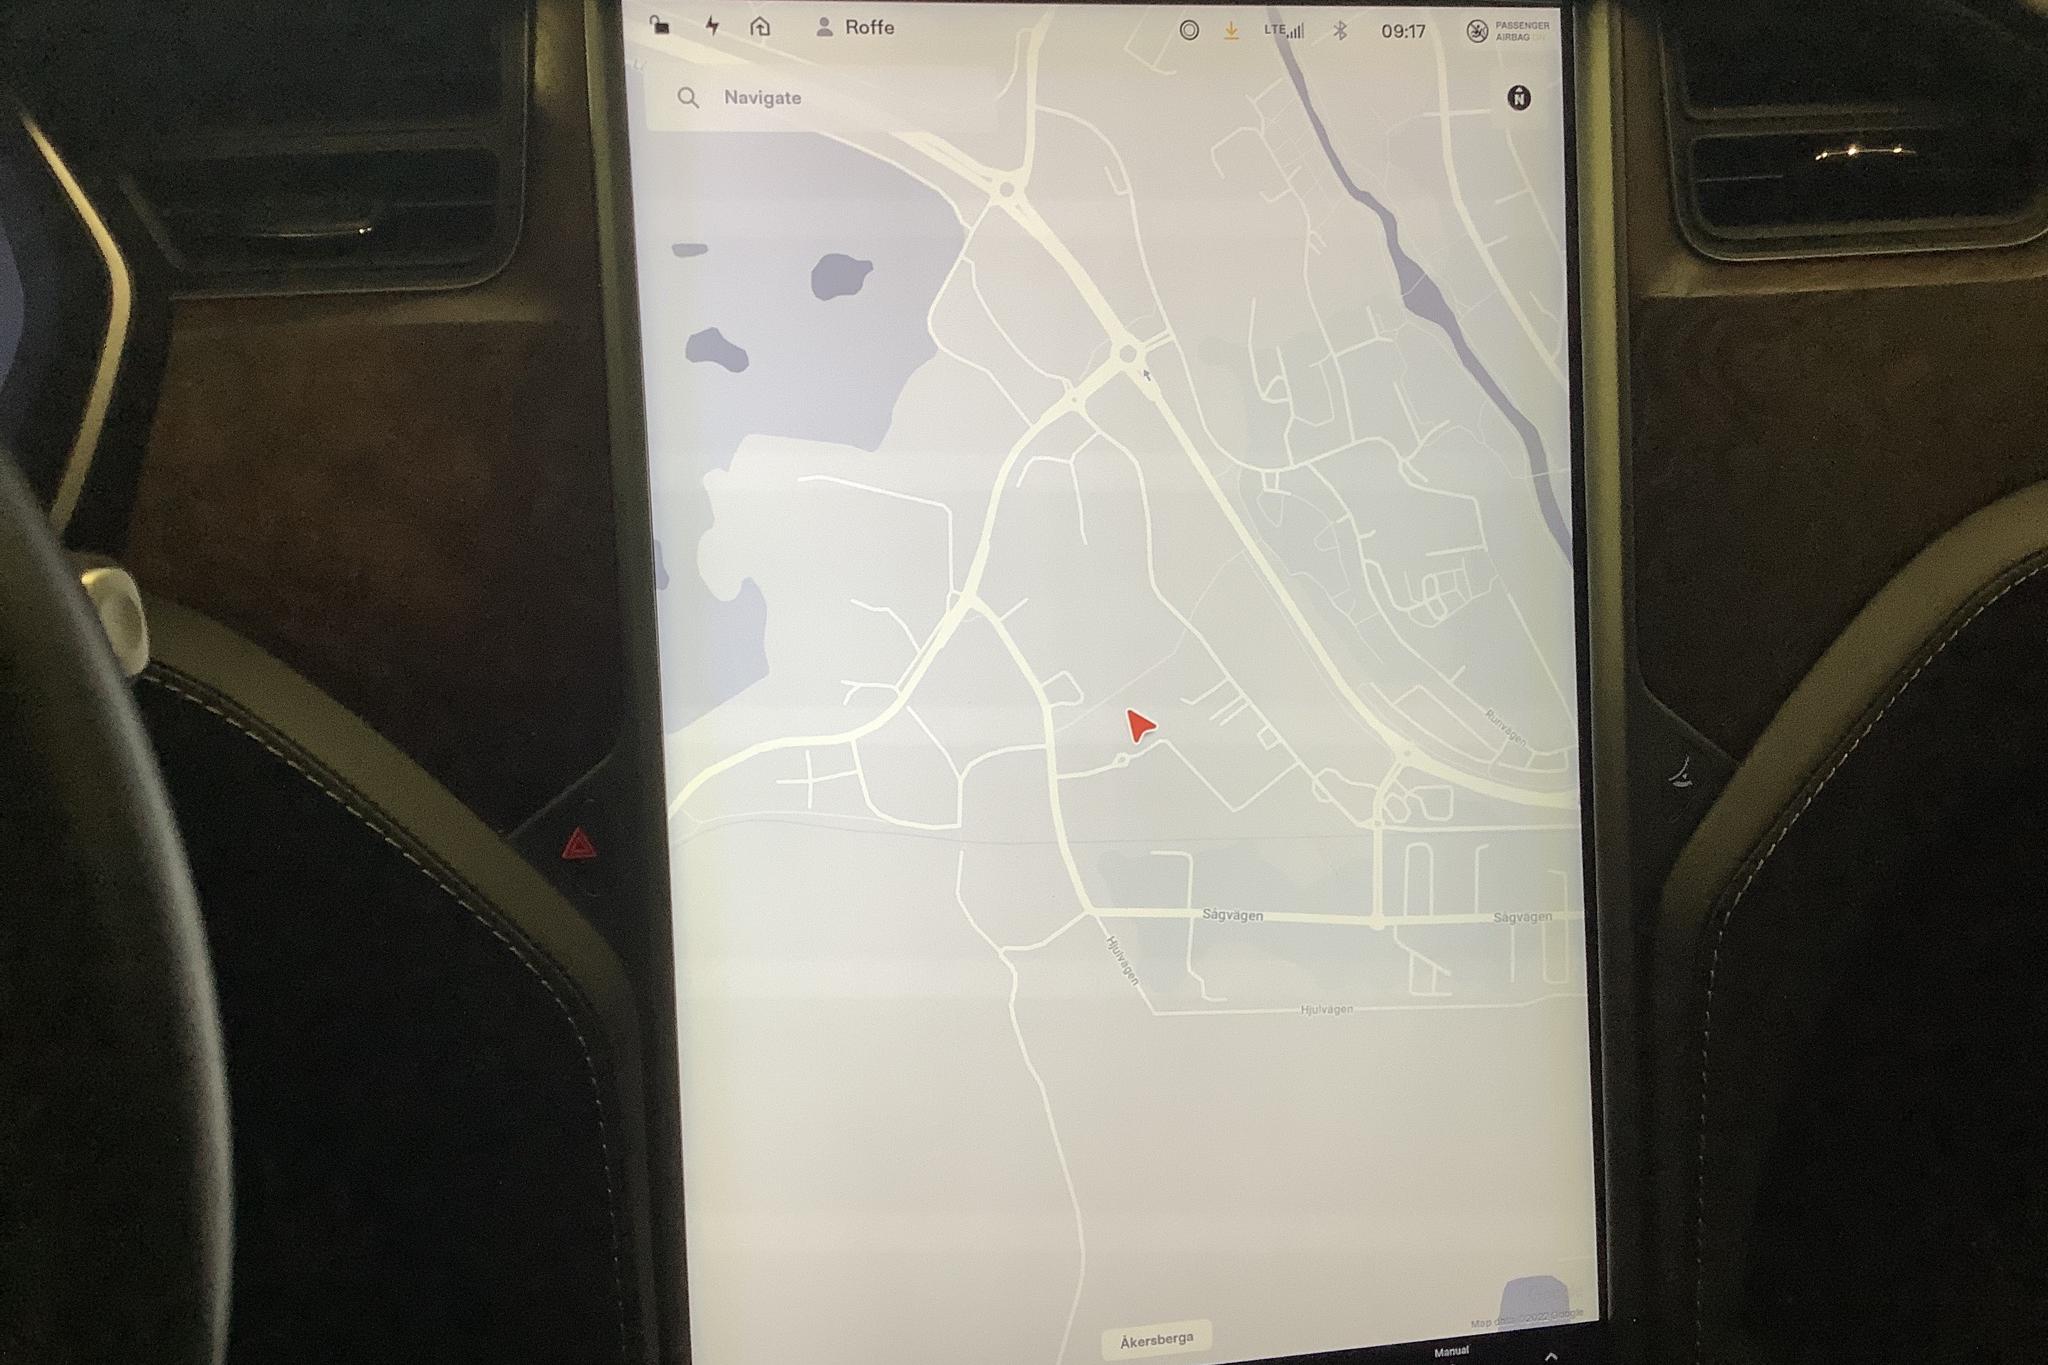 Tesla Model S P100D - 101 040 km - Automatic - red - 2018